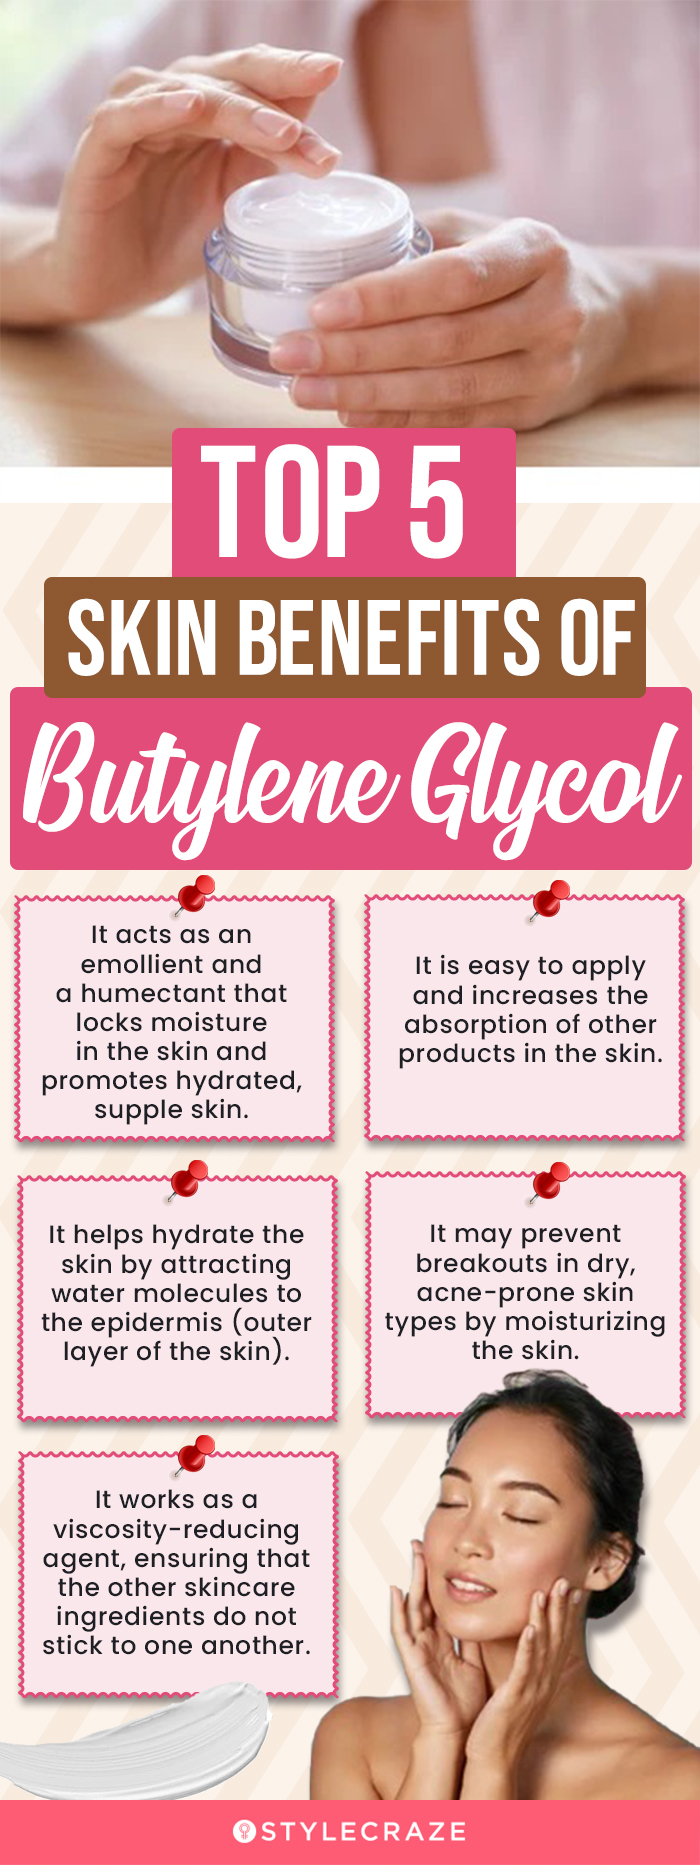 top 5 skin benefits of butylene glycol (infographic)